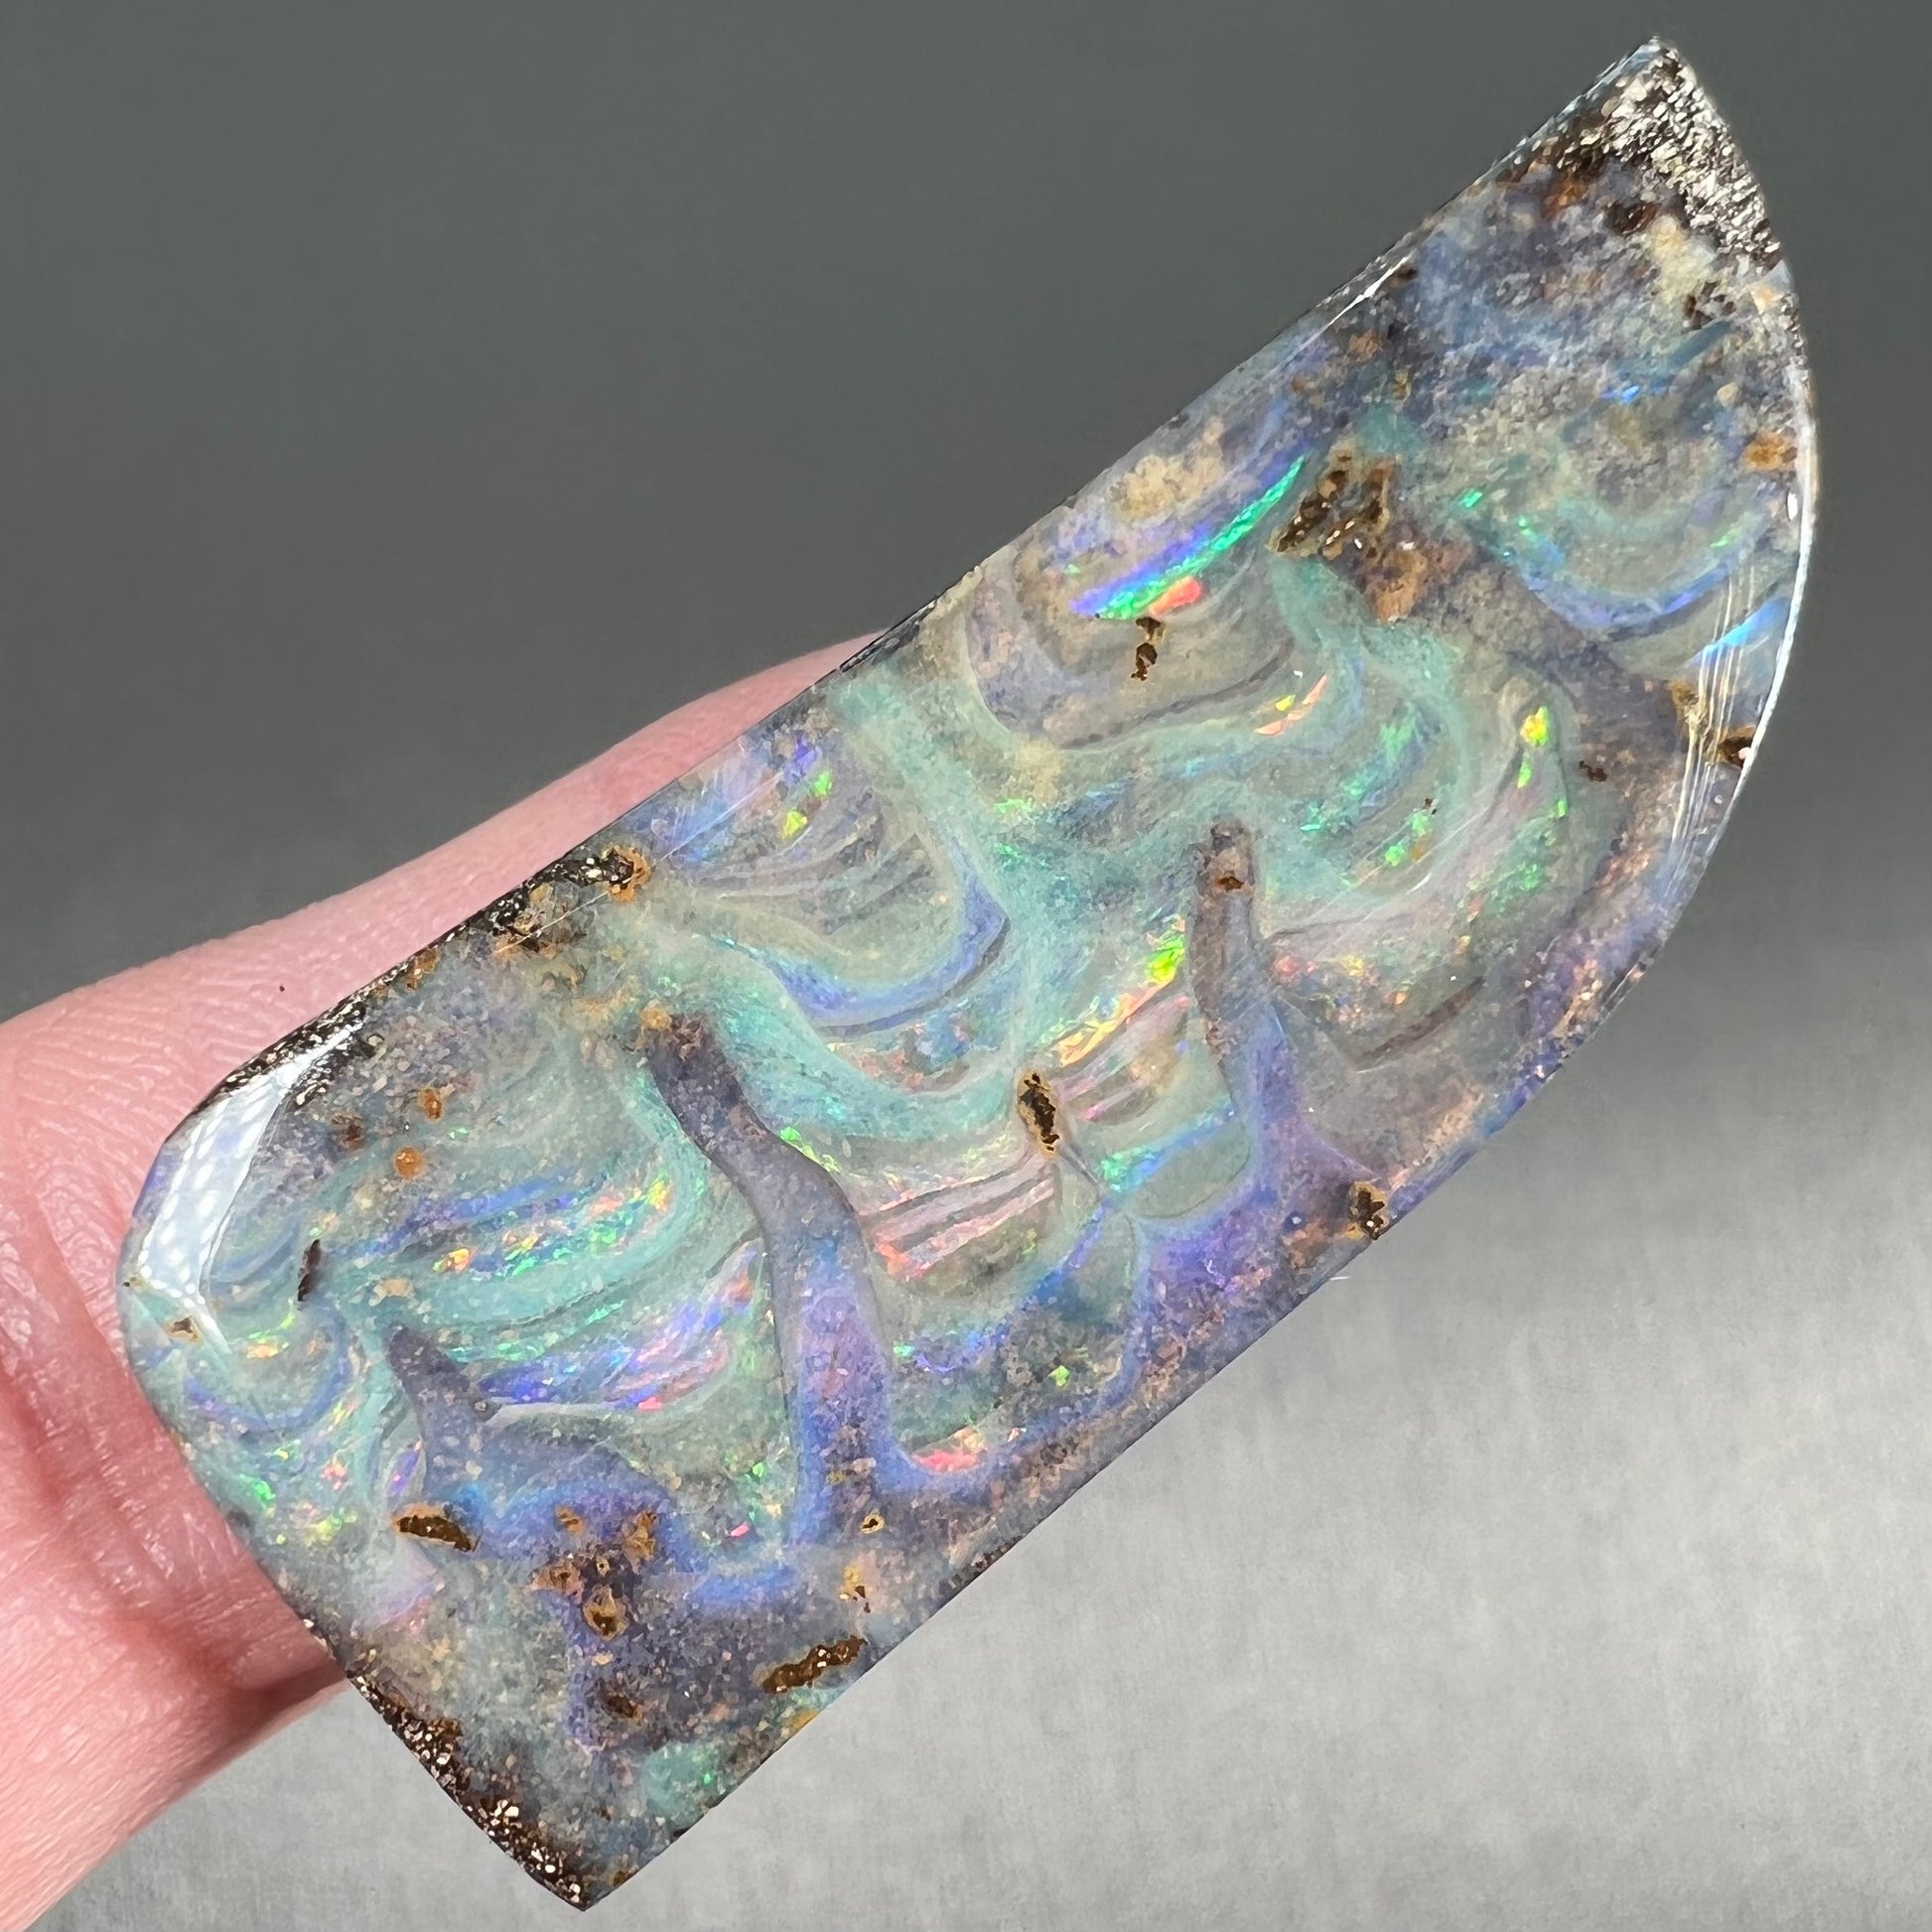 A loose, freeform cut, natural boulder opal stone from Quilpie, Australia.